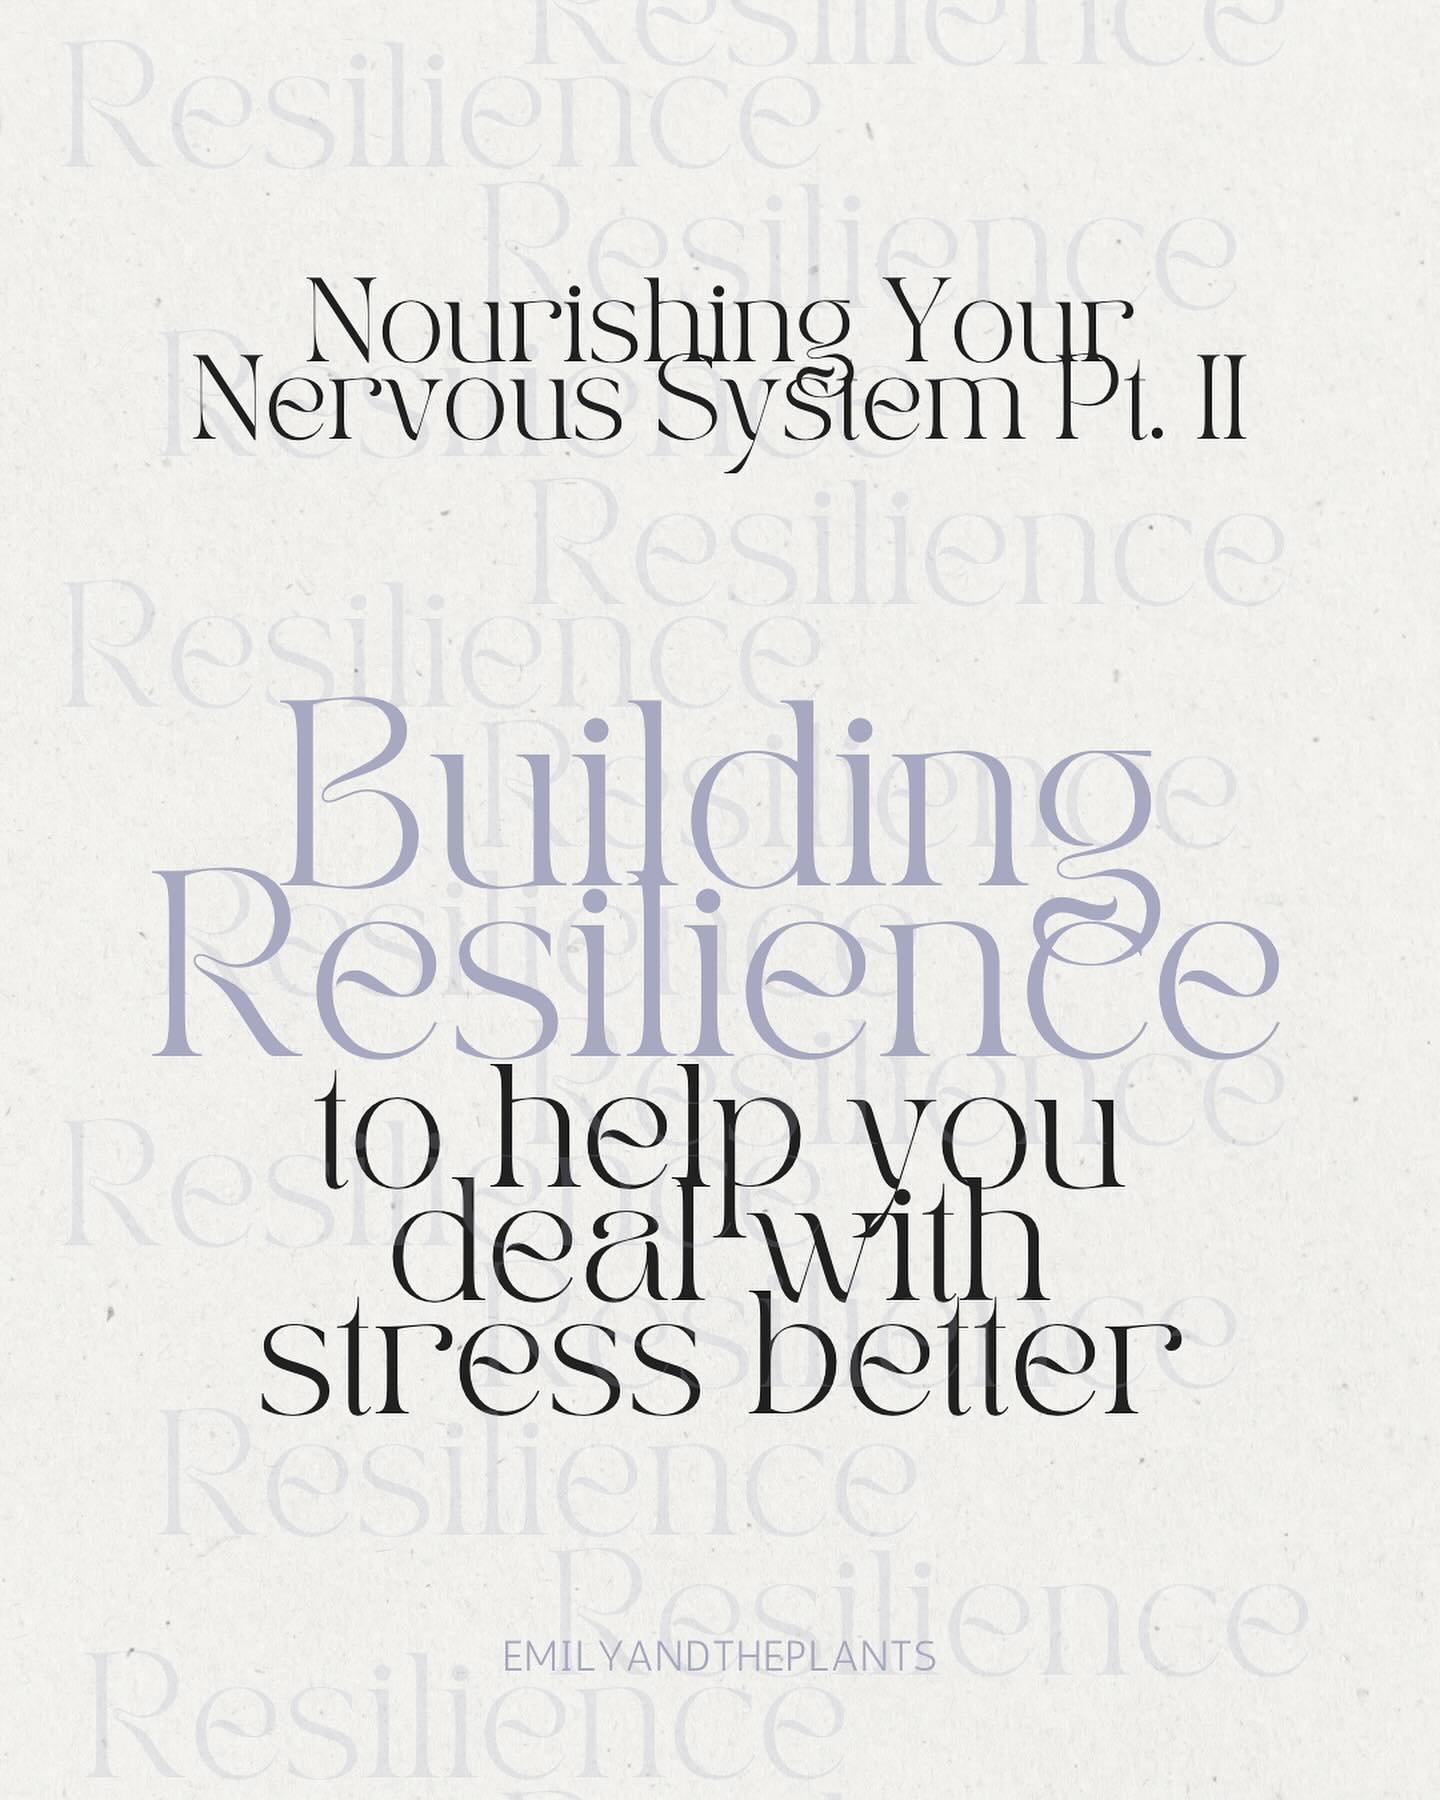 Helping your nervous system deal with stress 

Part of helping your nervous system heal starts with building your resilience to stress 

Your nervous system health (or vagal tone) can be made stronger and more resilient as much as your body and mind.